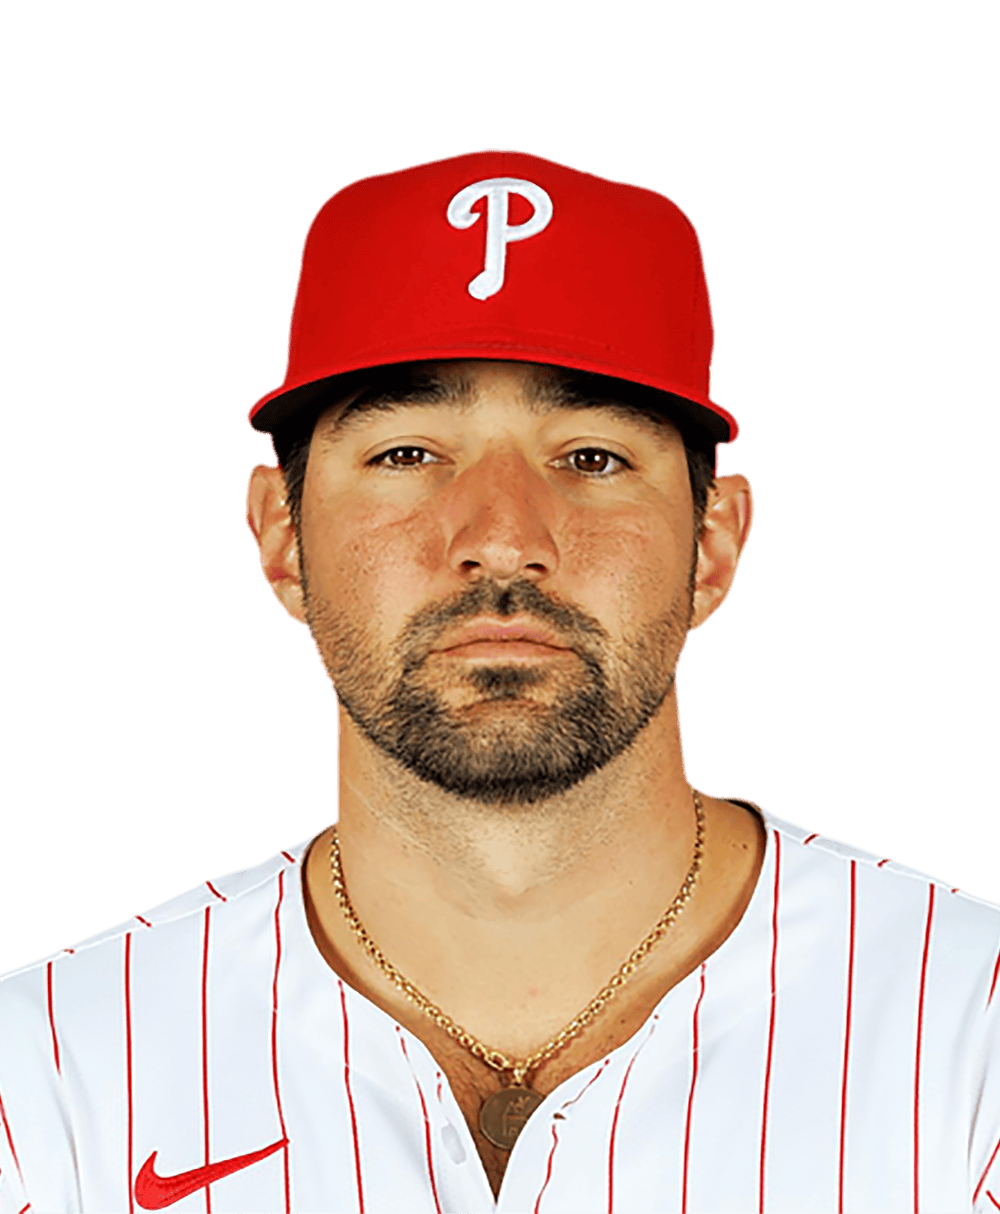 Phillies: Nick Castellanos greeted his son in stands after home run